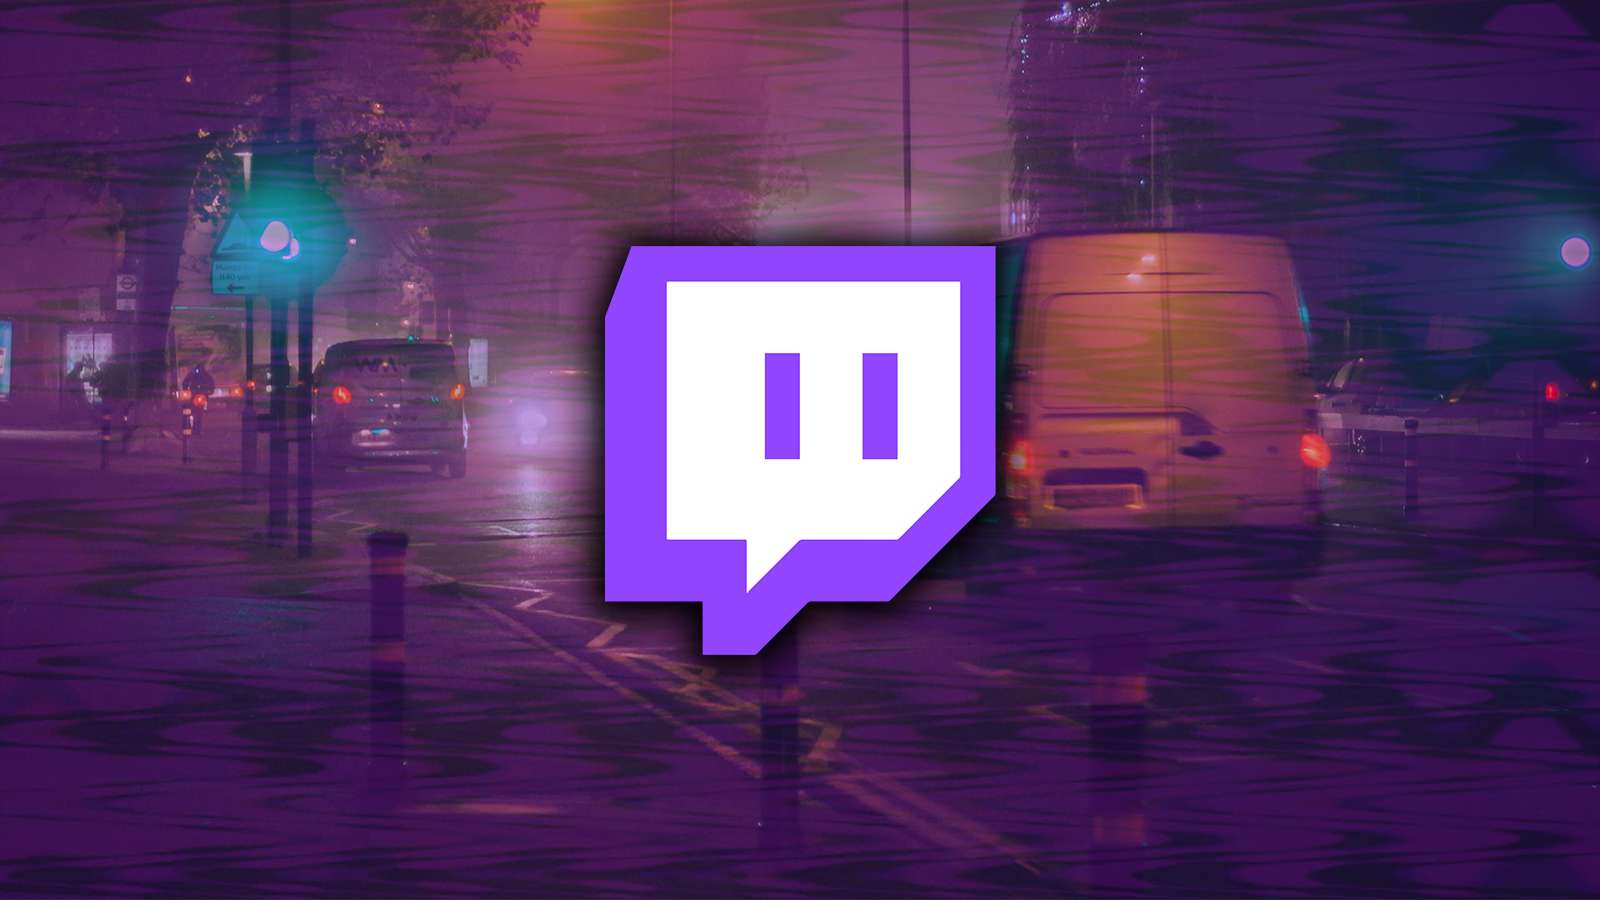 Twitch streamer captures drive by shooting in terrifying clipUns